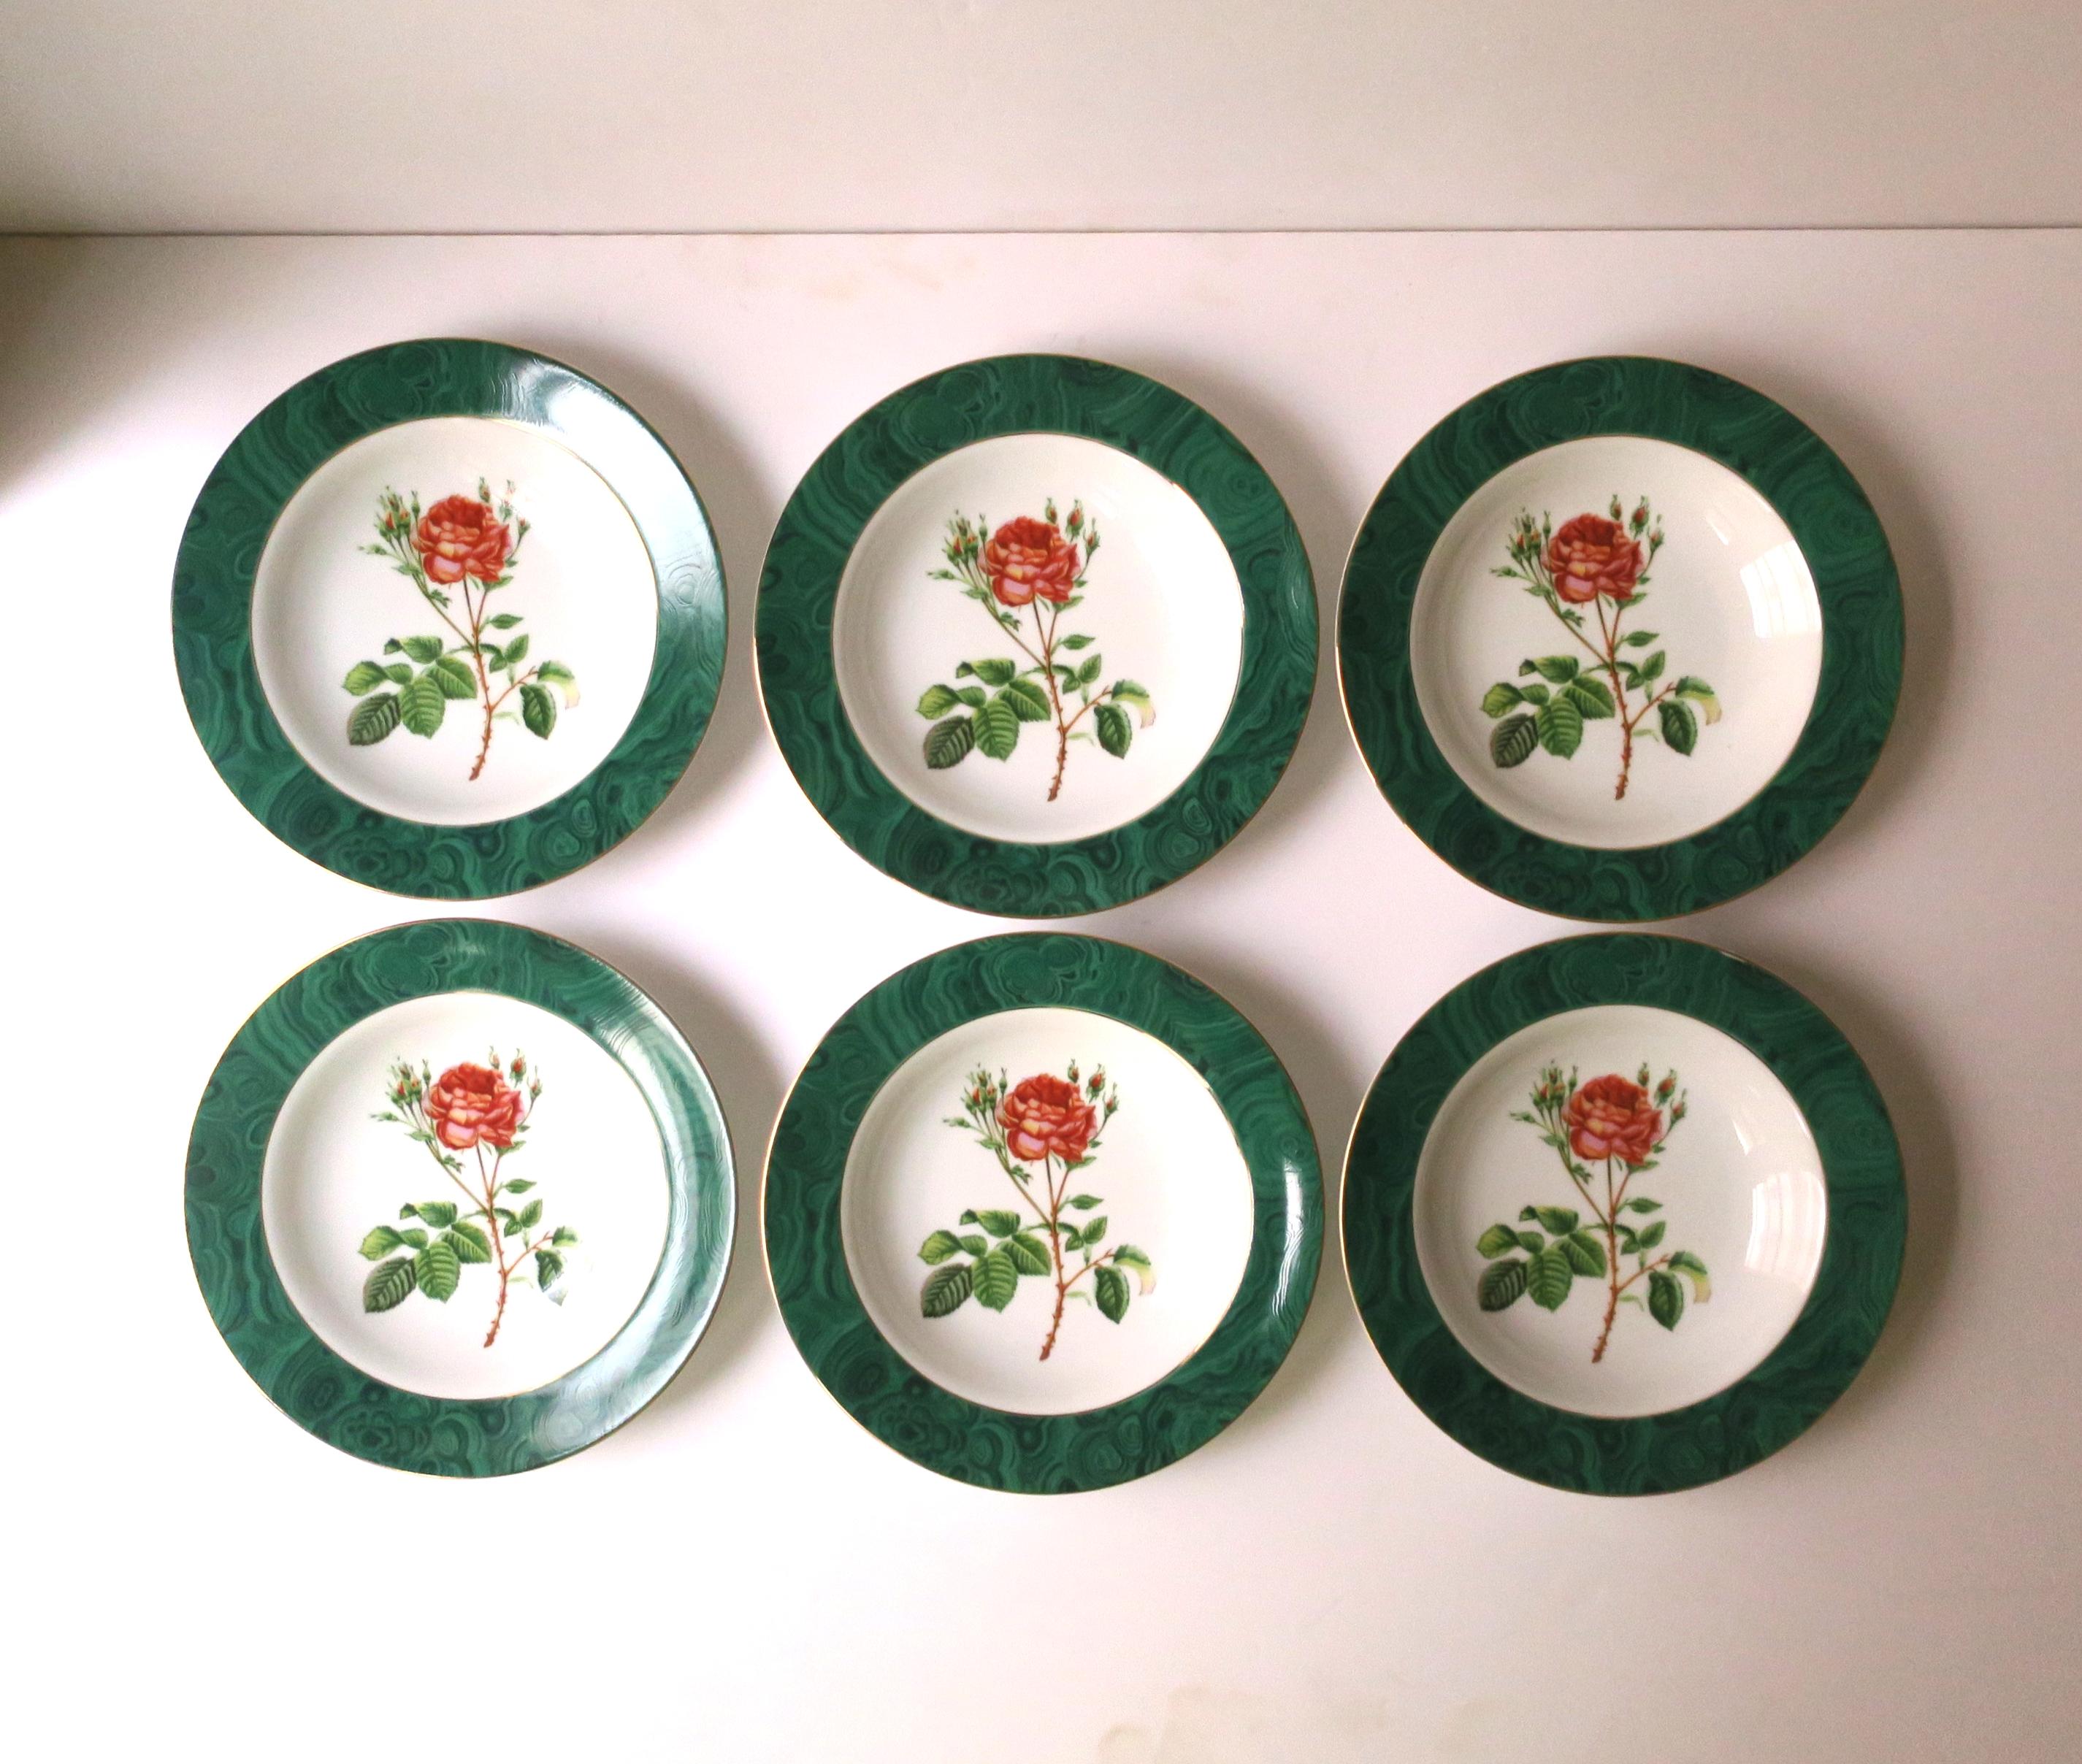 A beautiful set of six (6) porcelain soup, salad, or serving/entertaining bowls with a green malachite rim/edge and chintz rose flower center design by Georges Briard, circa late-20th century. A great set to use for soup or salad and to mix/match